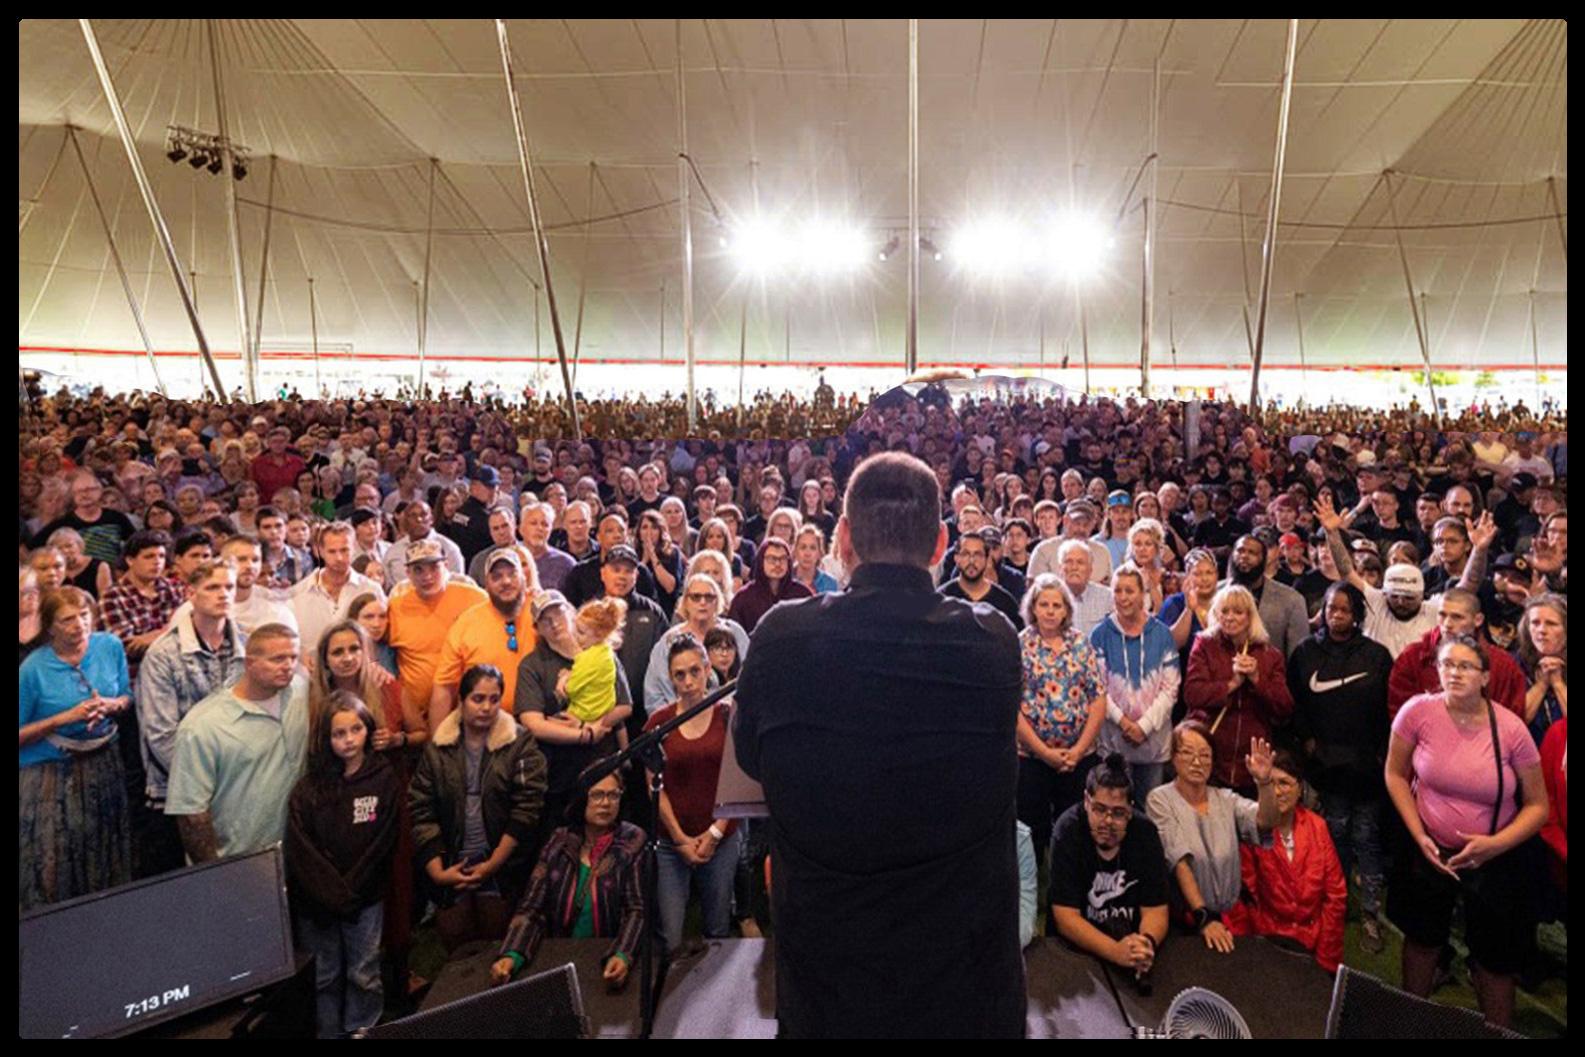 View of a large crowd under a tent